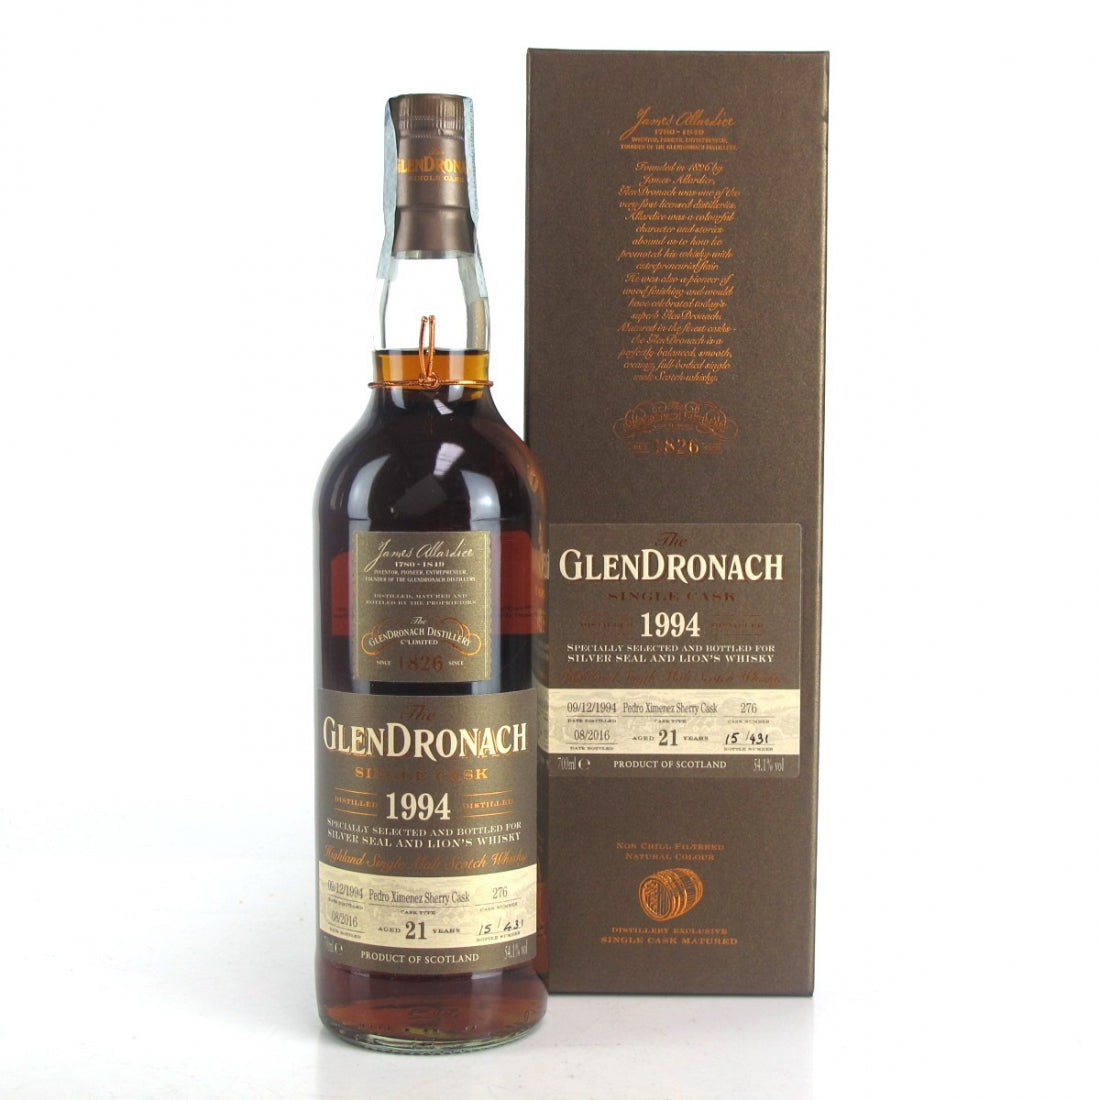 GlenDroanch 1994 – 21 Years Old – 54,1% Cask 276 (PX Sherry Cask)